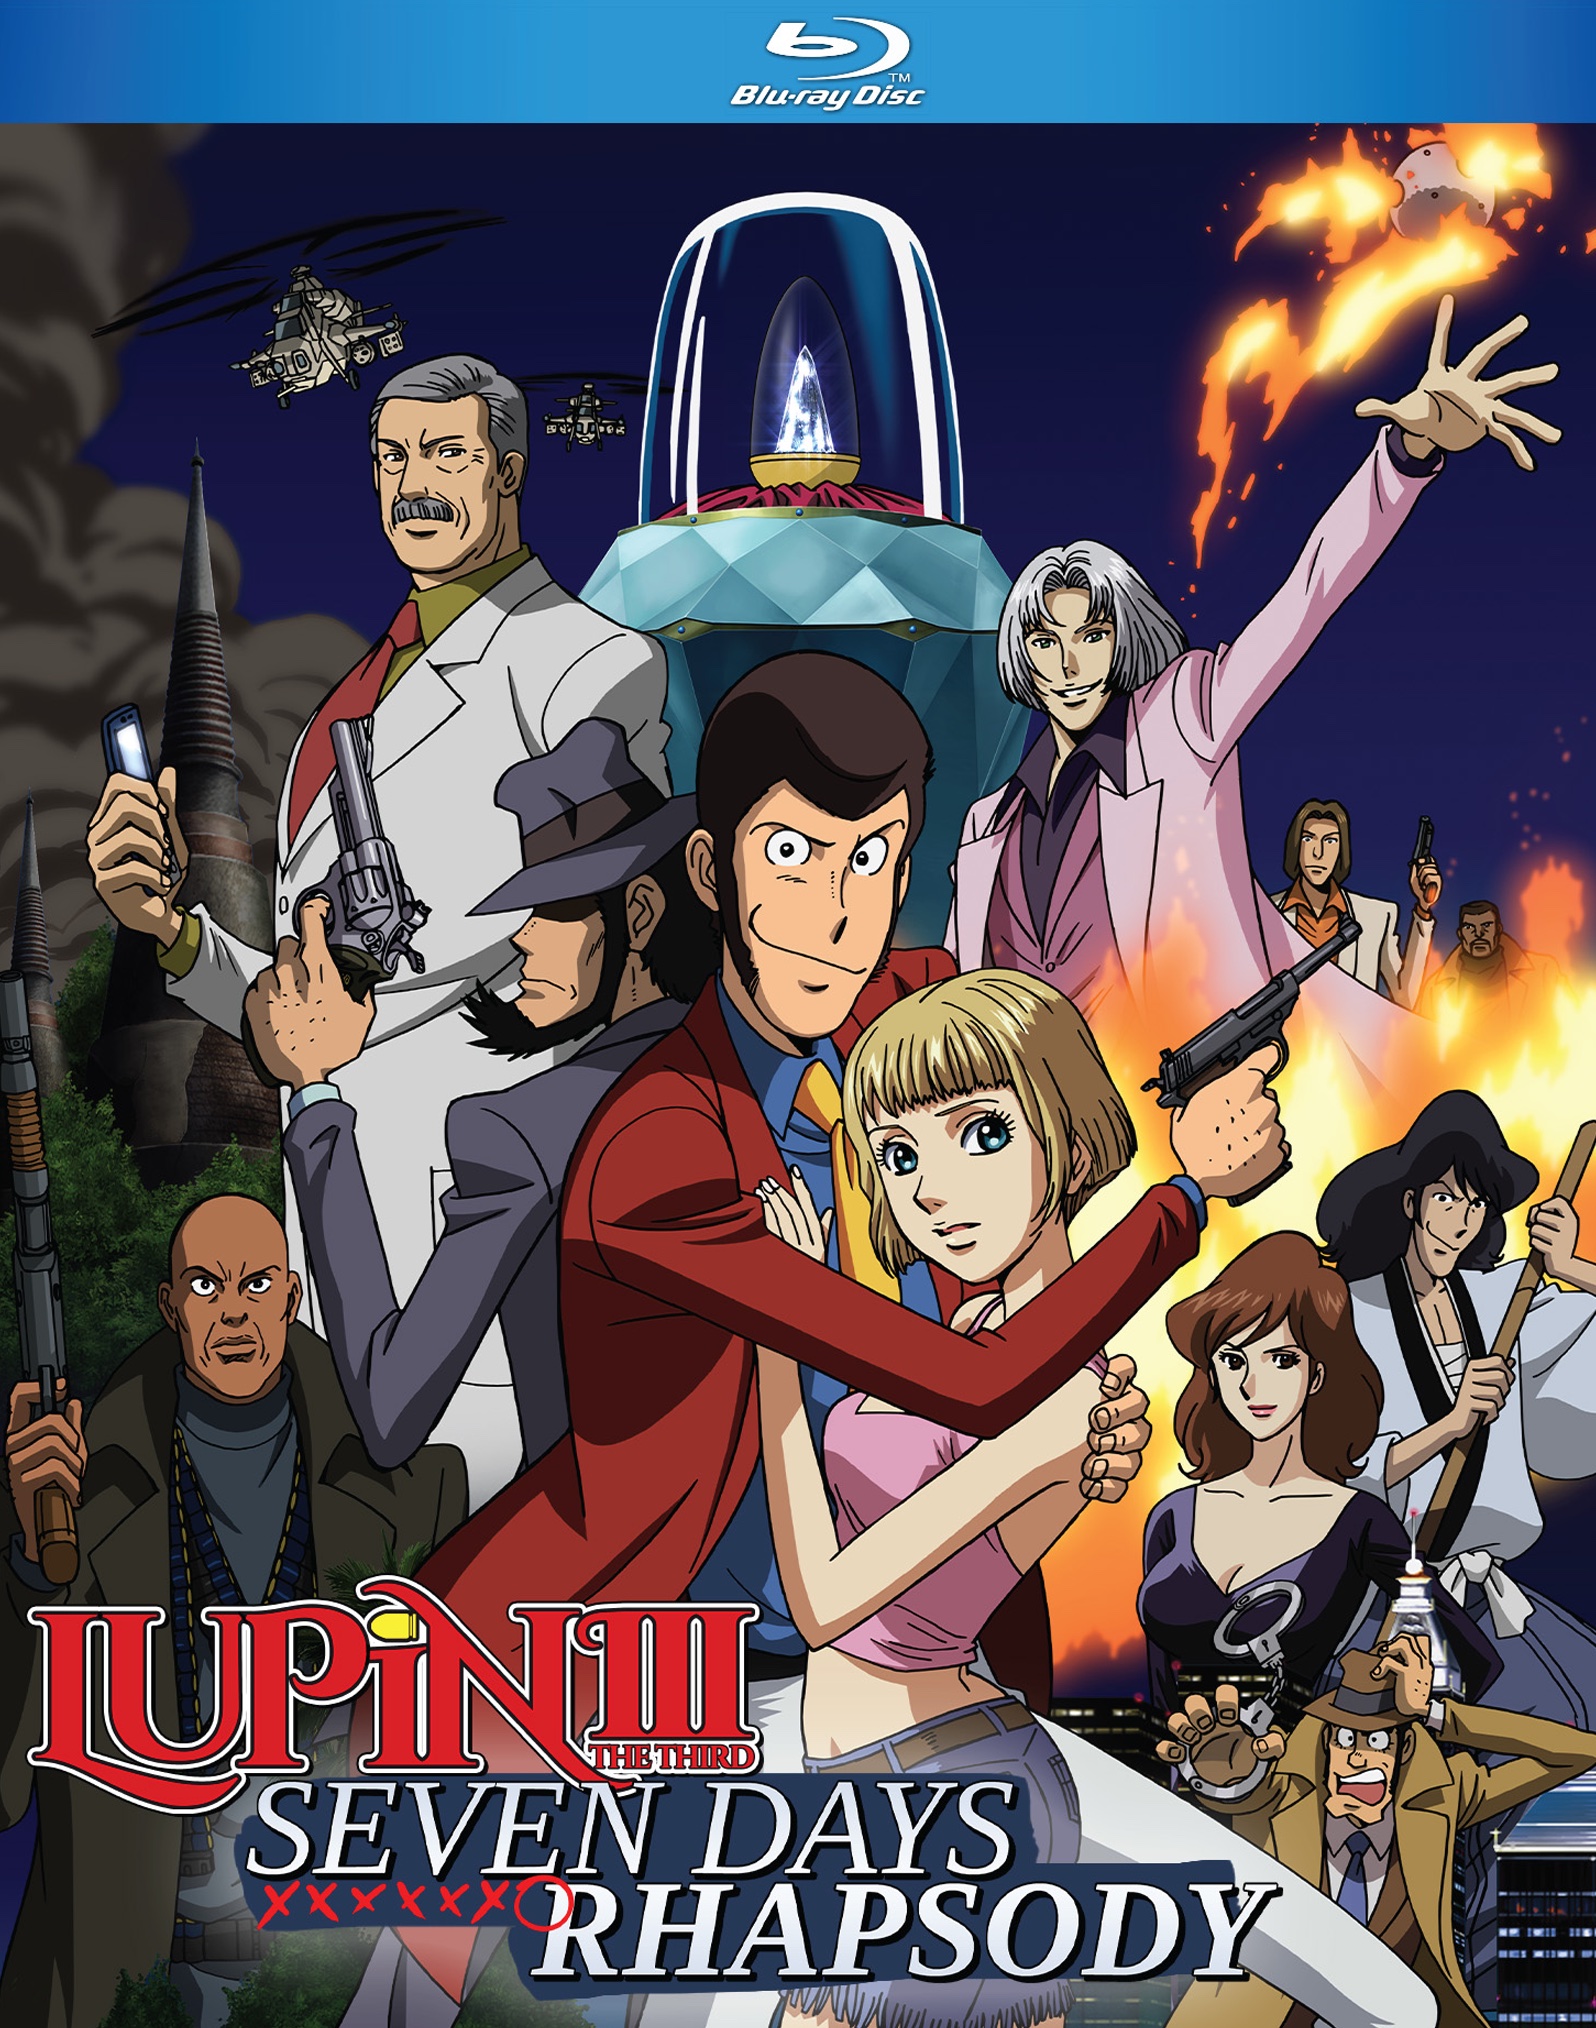 lupin-the-3rd-seven-days-rhapsody-blu-ray image count 0